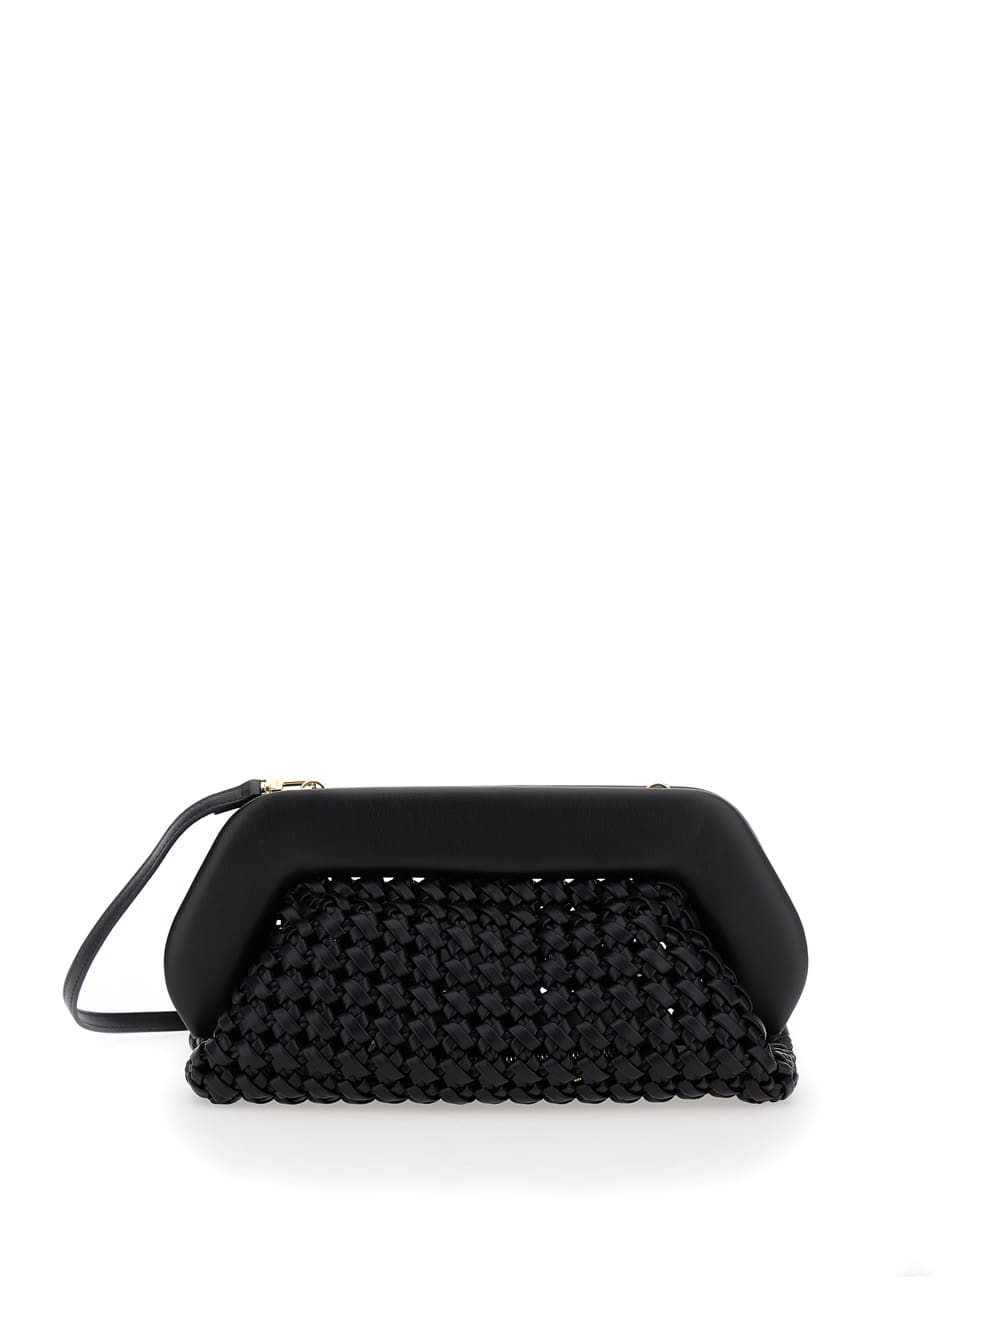 THEMOIRè bios Knots Black Clutch Bag With Braided Design In Eco Leather Woman